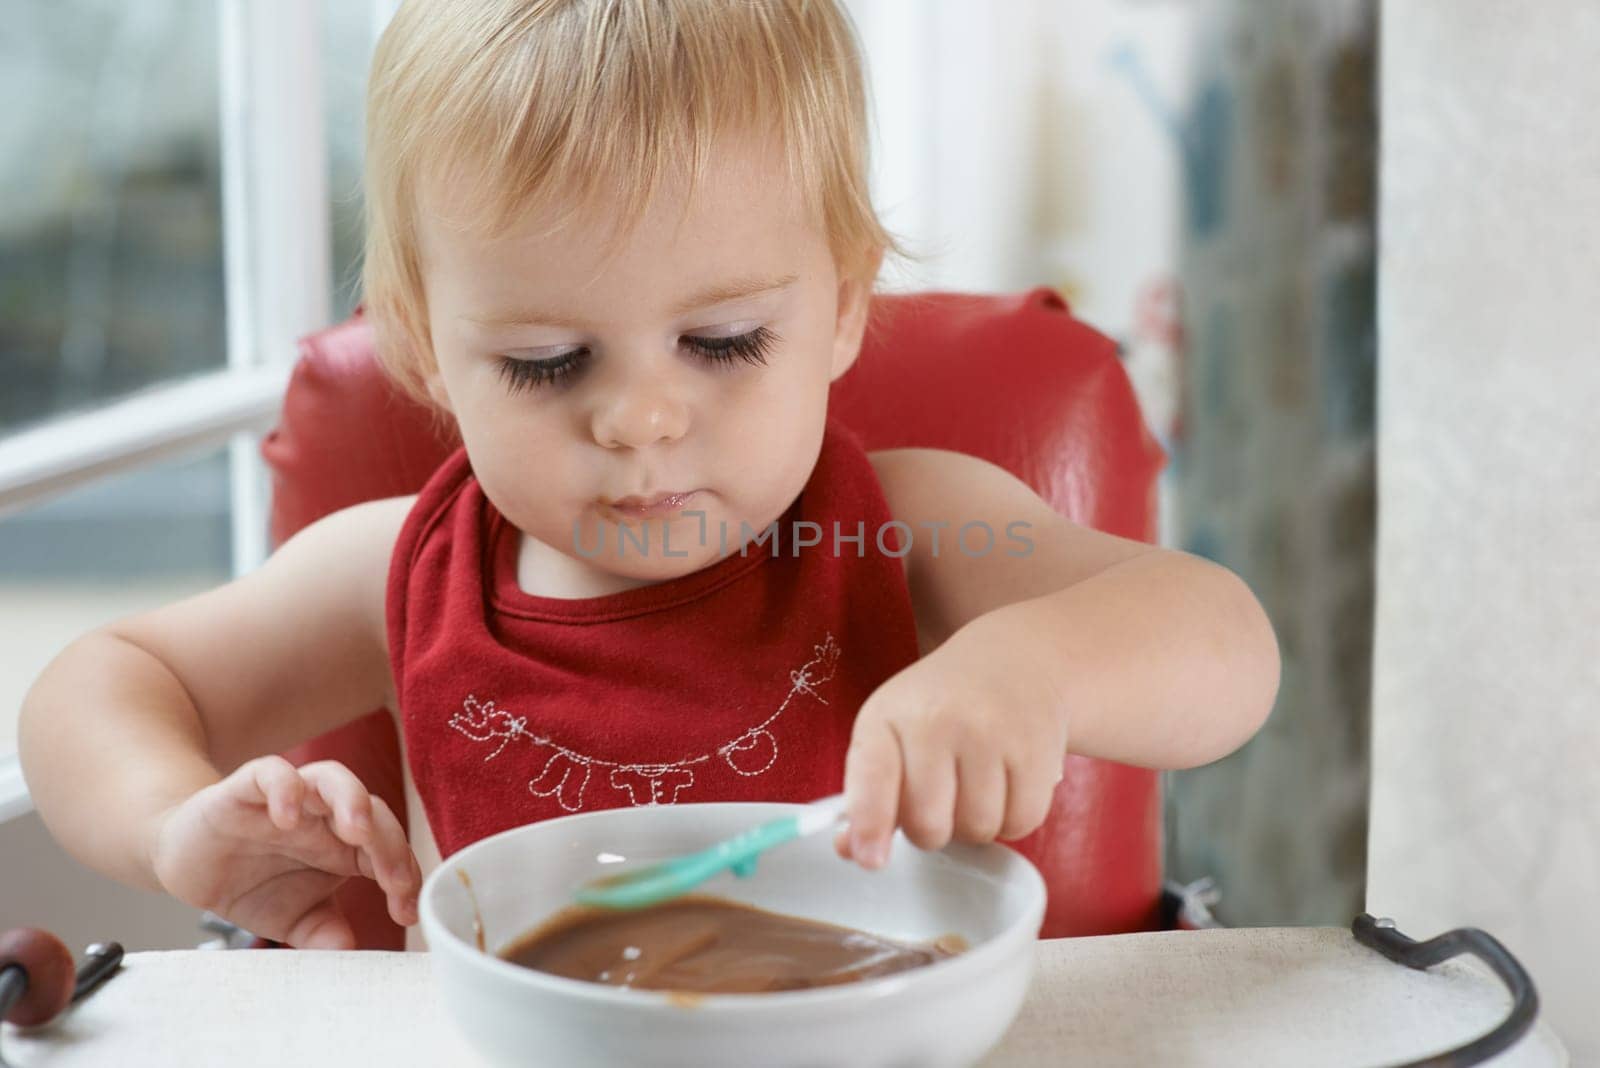 Hungry, sweet and baby eating porridge for health, nutrition or child development at home. Food, cute and girl toddler or kid enjoying an organic puree meal for lunch or dinner in high chair at house.